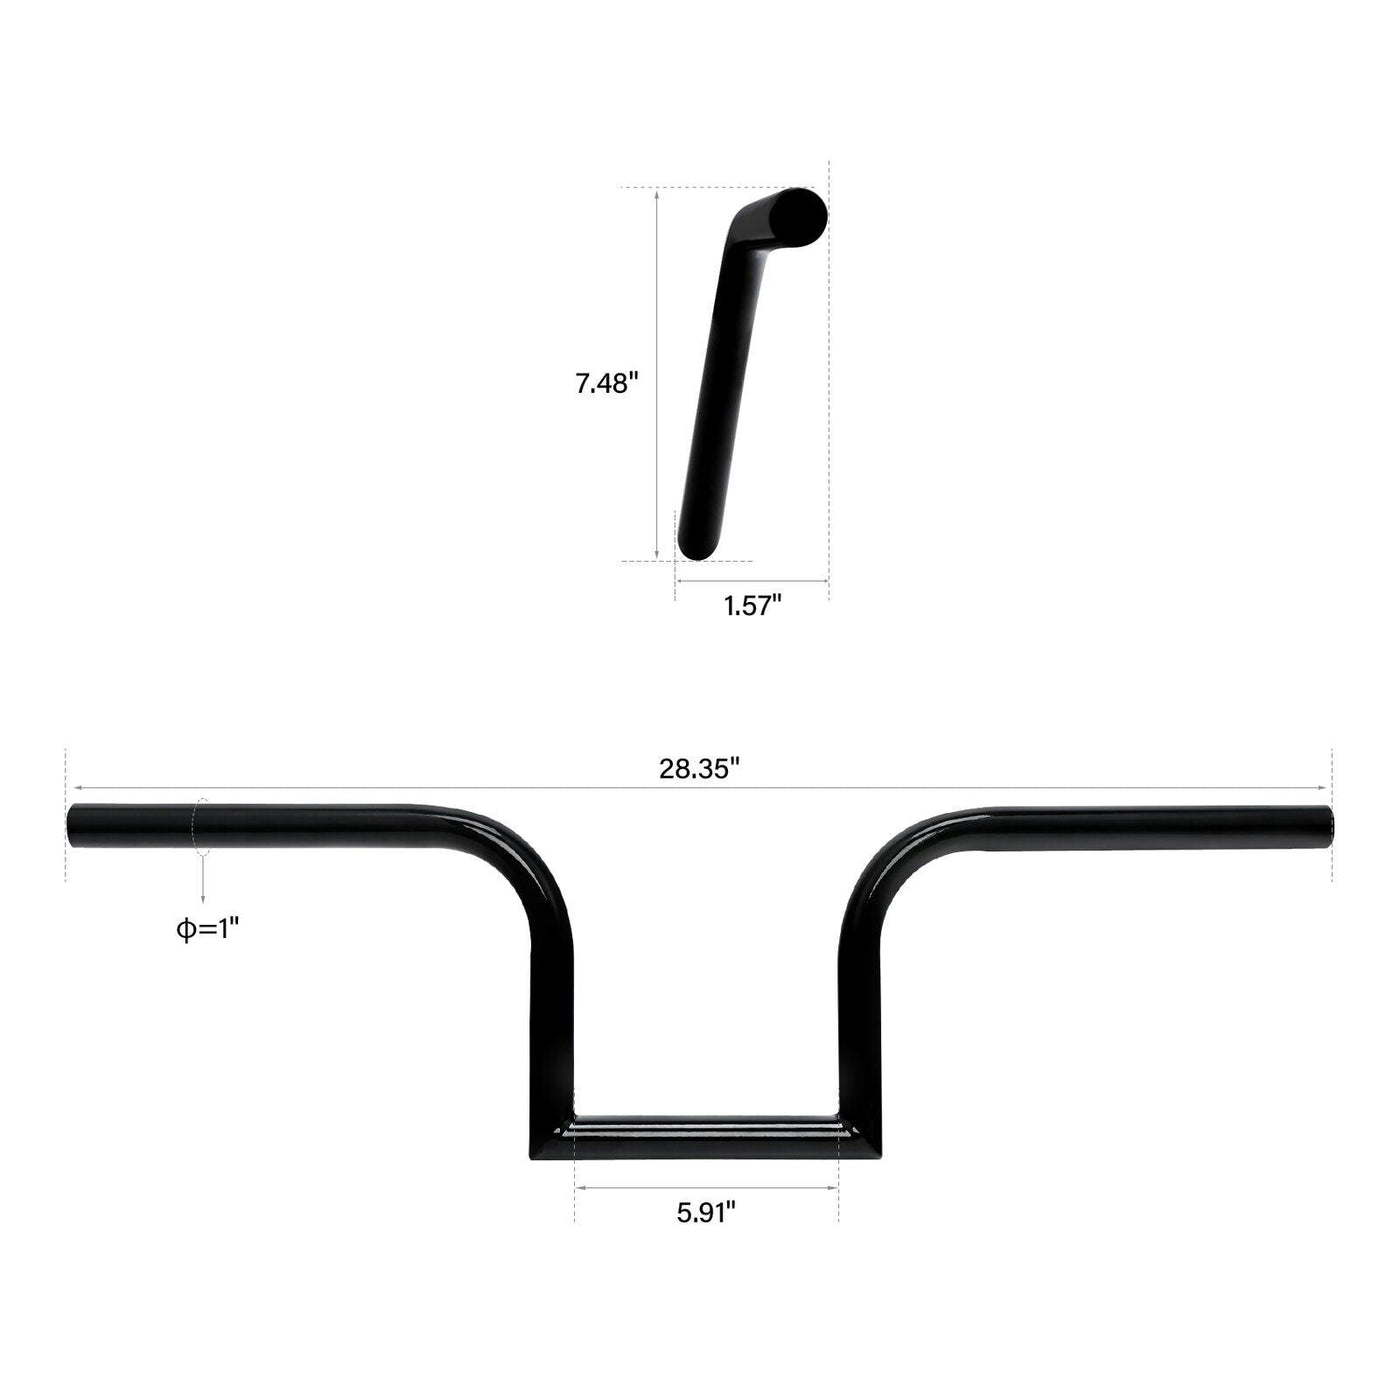 Black 7.48" Rise Z-Bars 1" Handlebar Fit For Harley Sportster 883 Dyna Low Rider - Moto Life Products